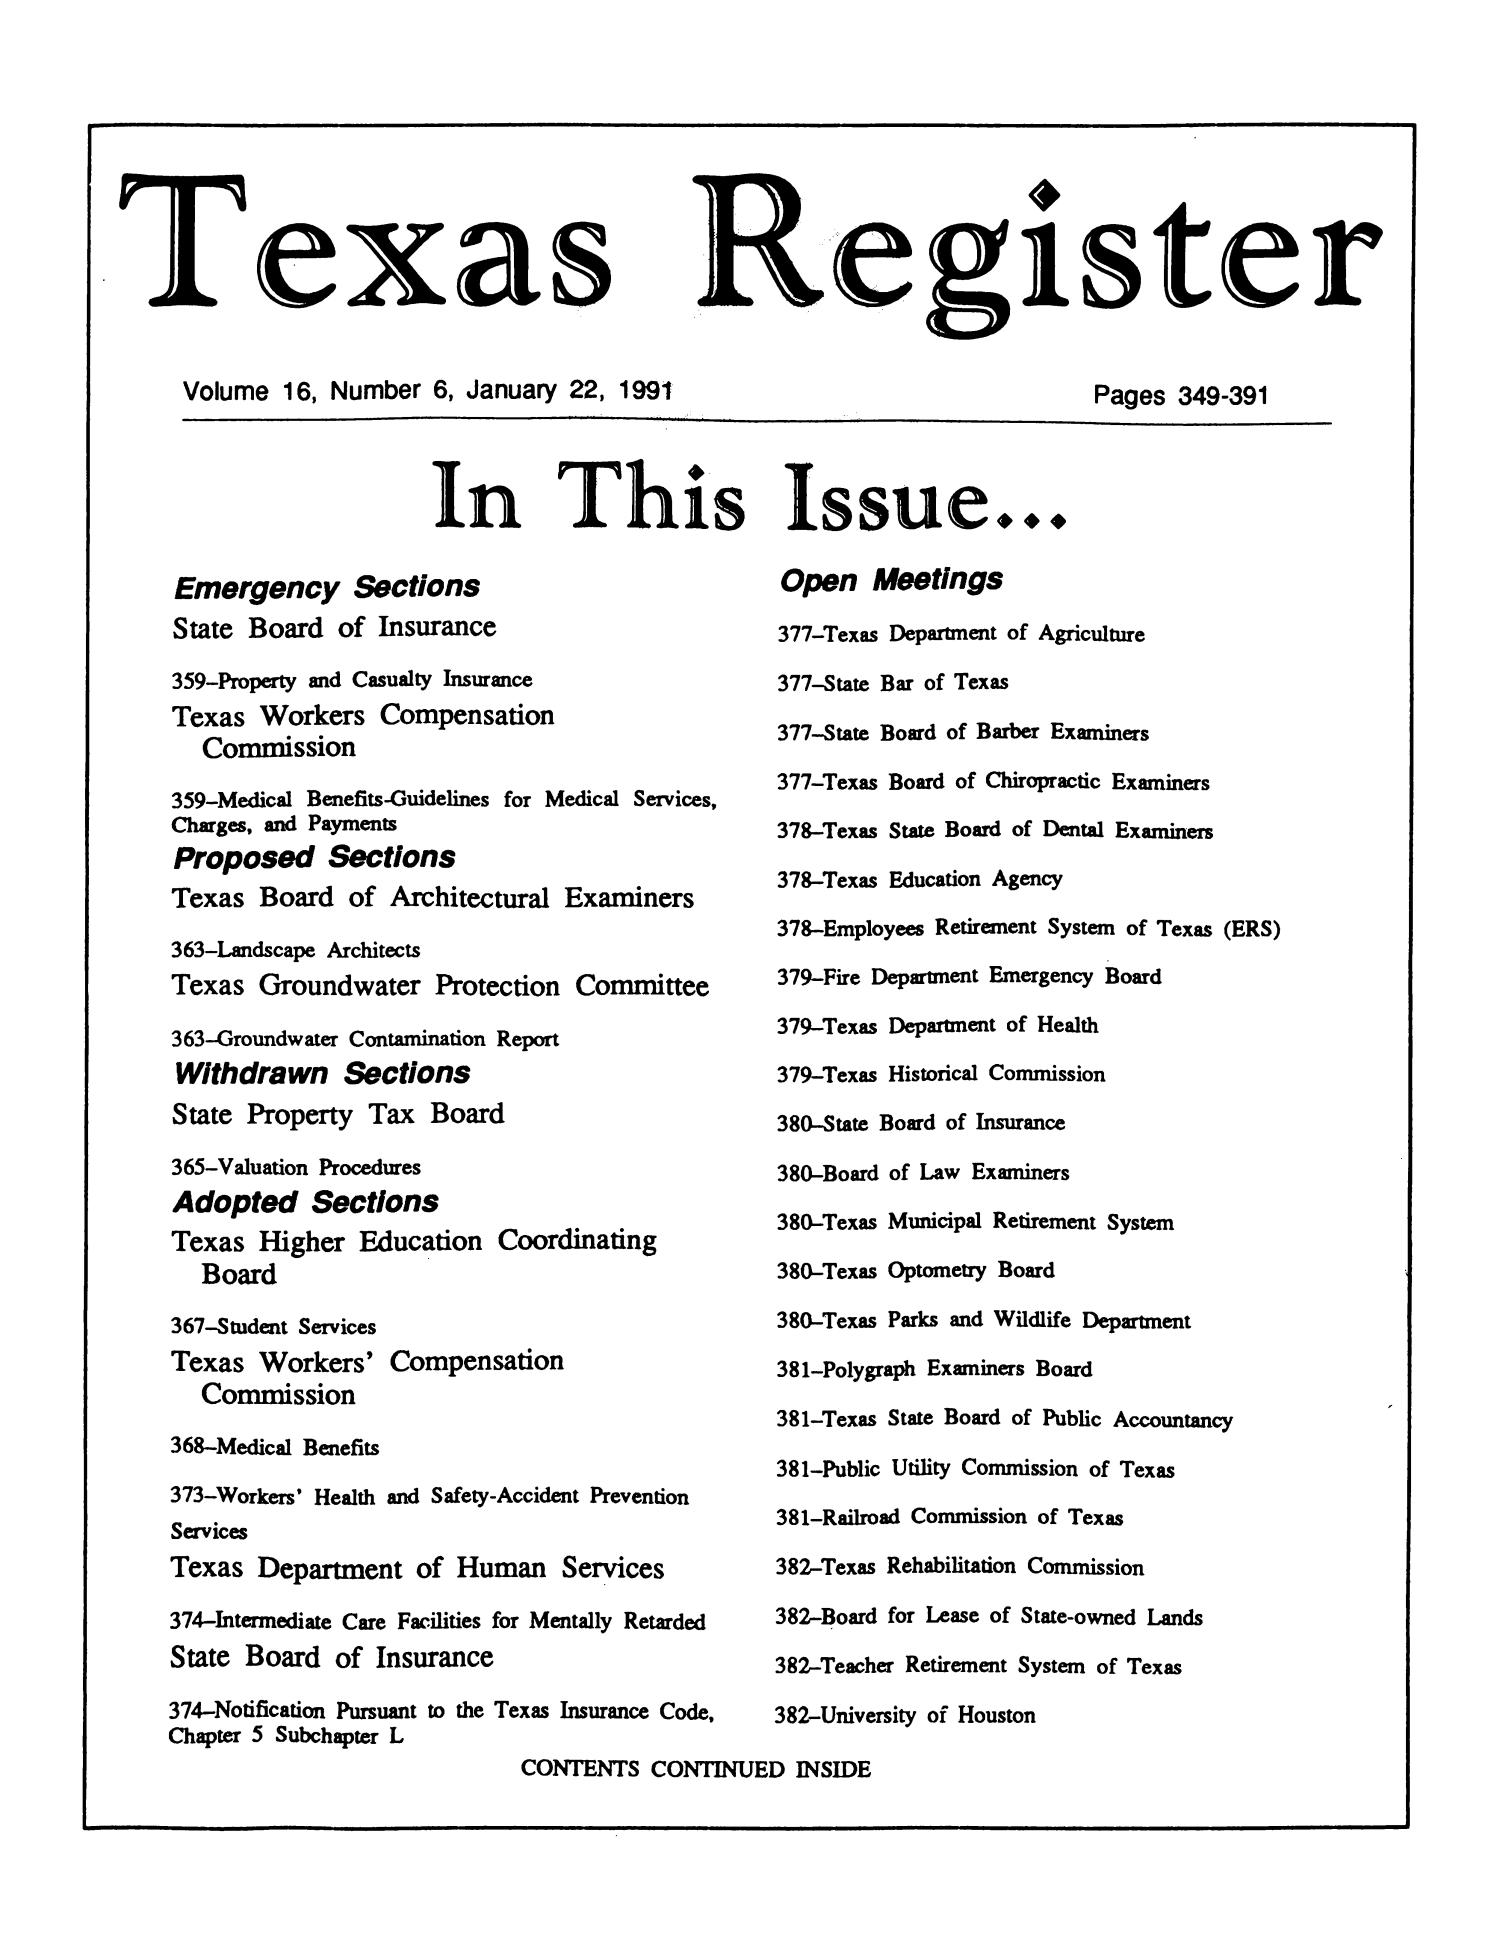 Texas Register, Volume 16, Number 6, Pages 349-391, January 22, 1991
                                                
                                                    Title Page
                                                